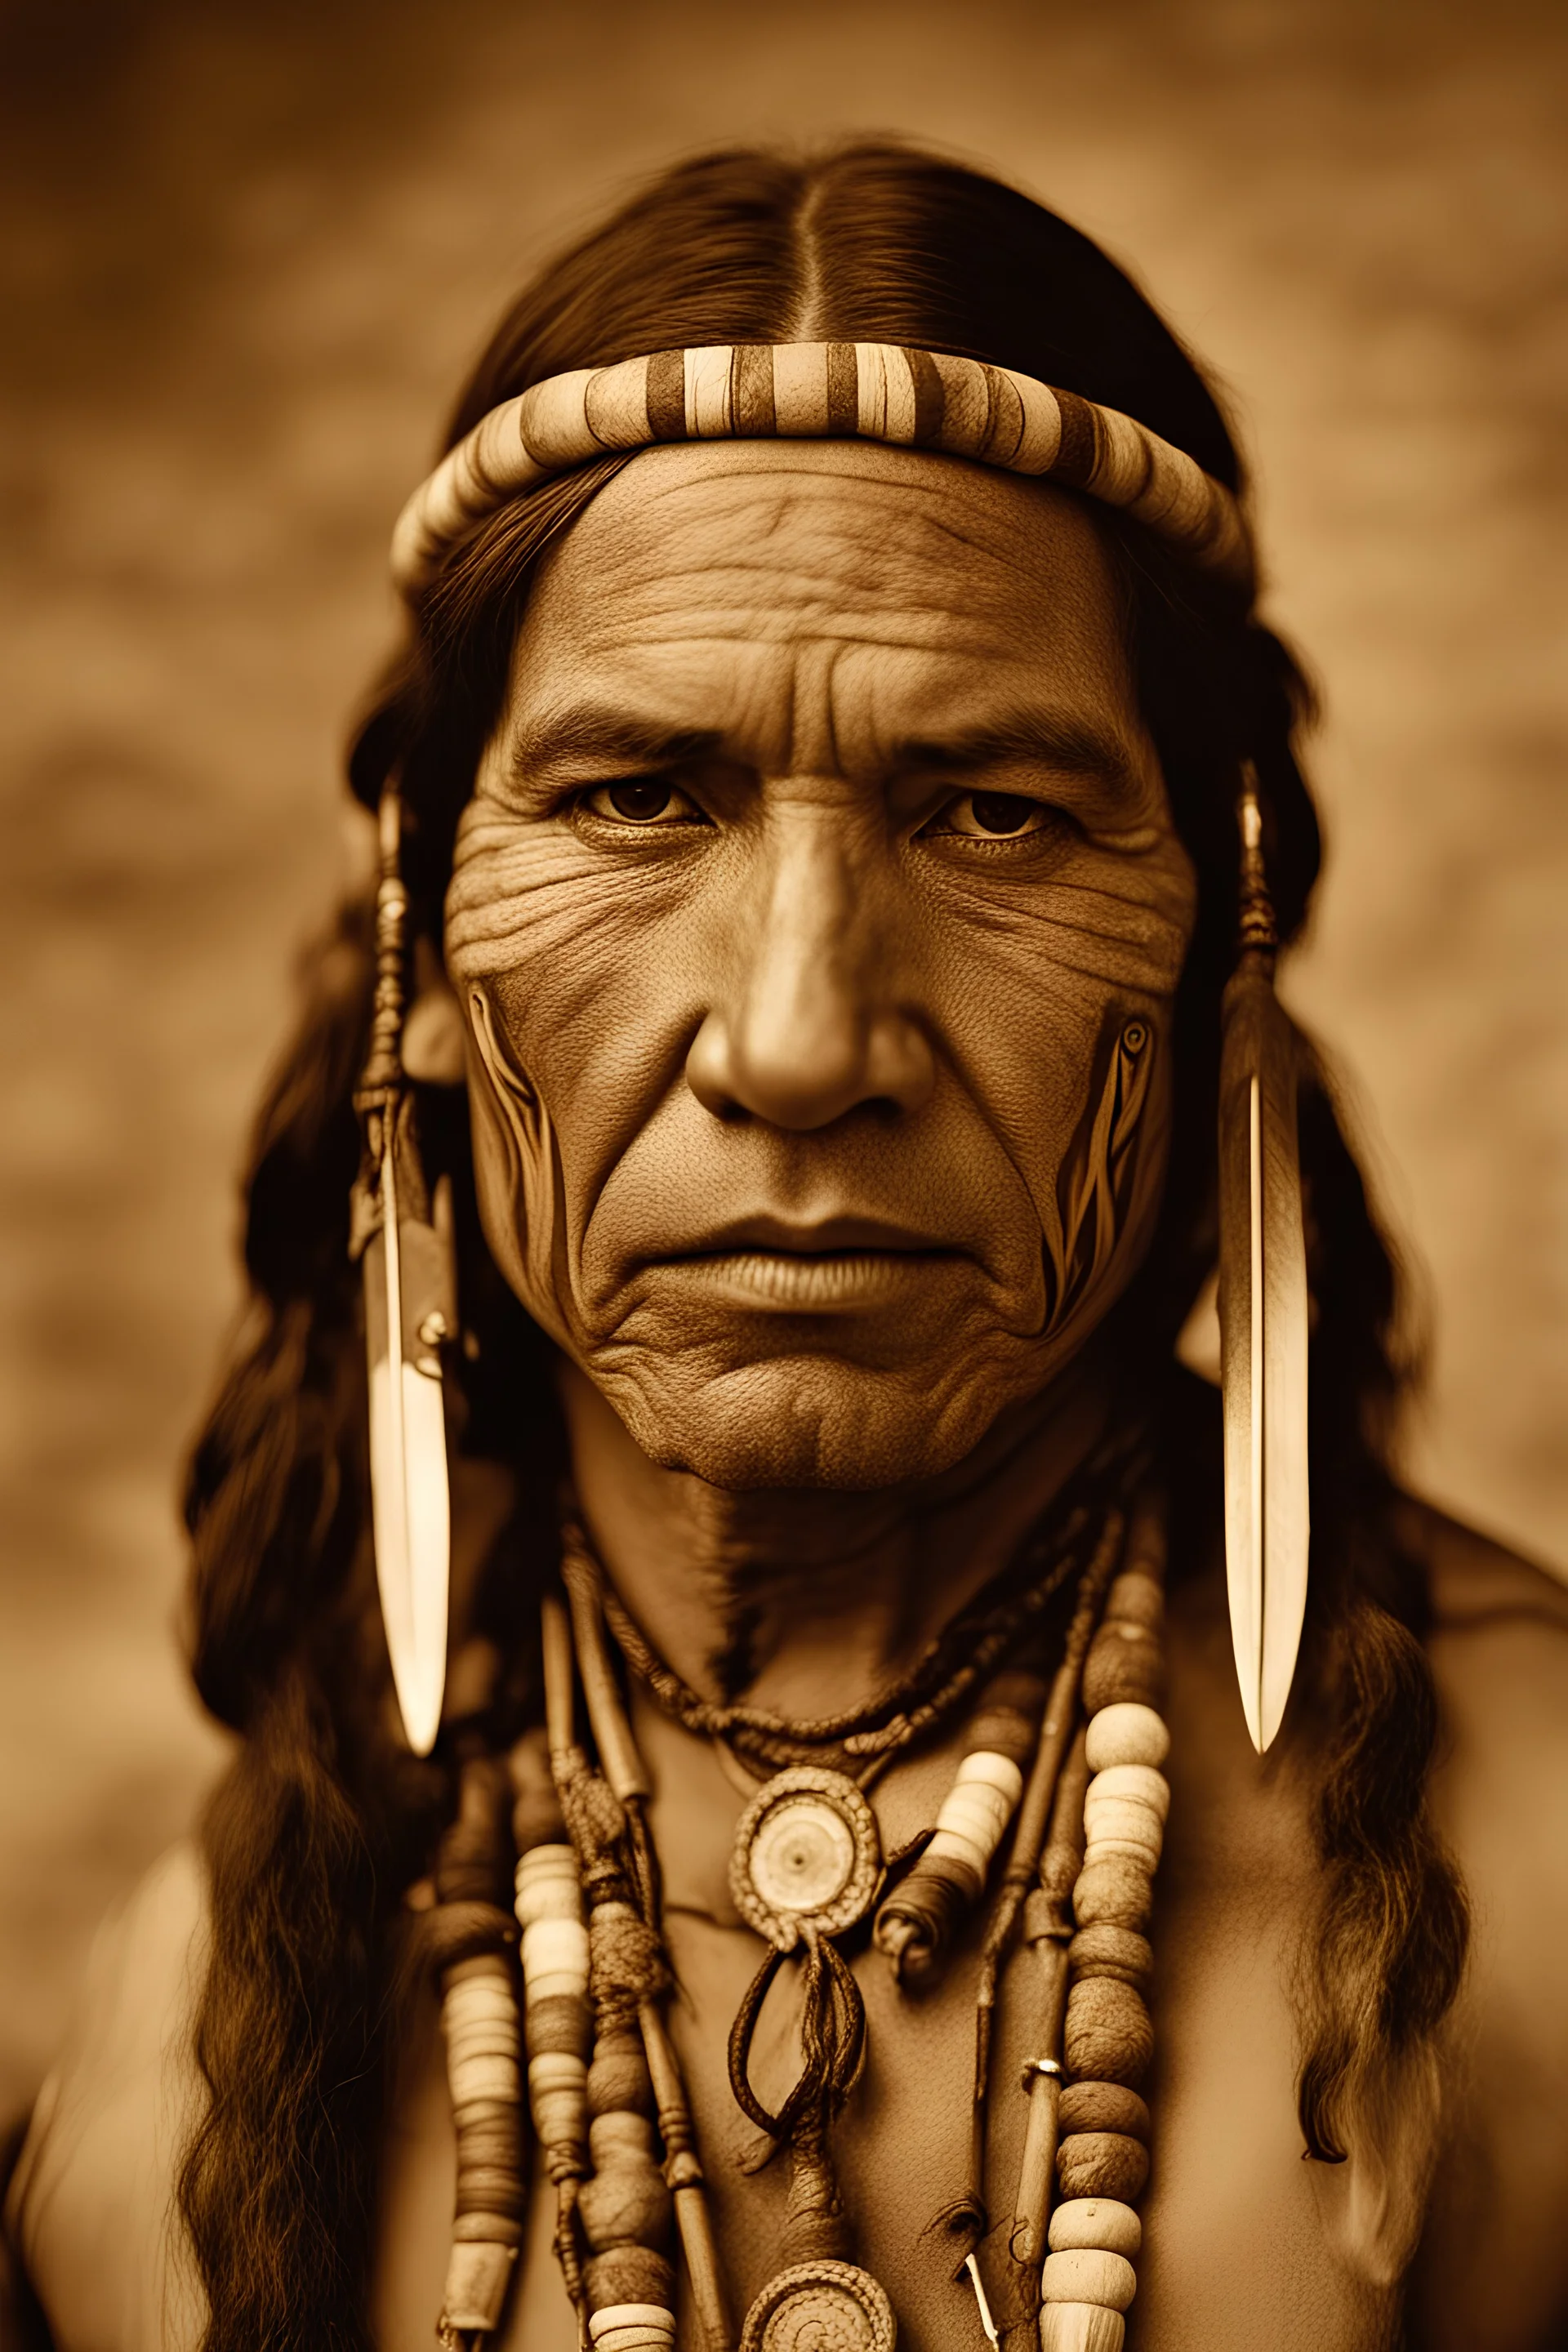 sepia portrait of native American face paint wearing an ornate survival knife